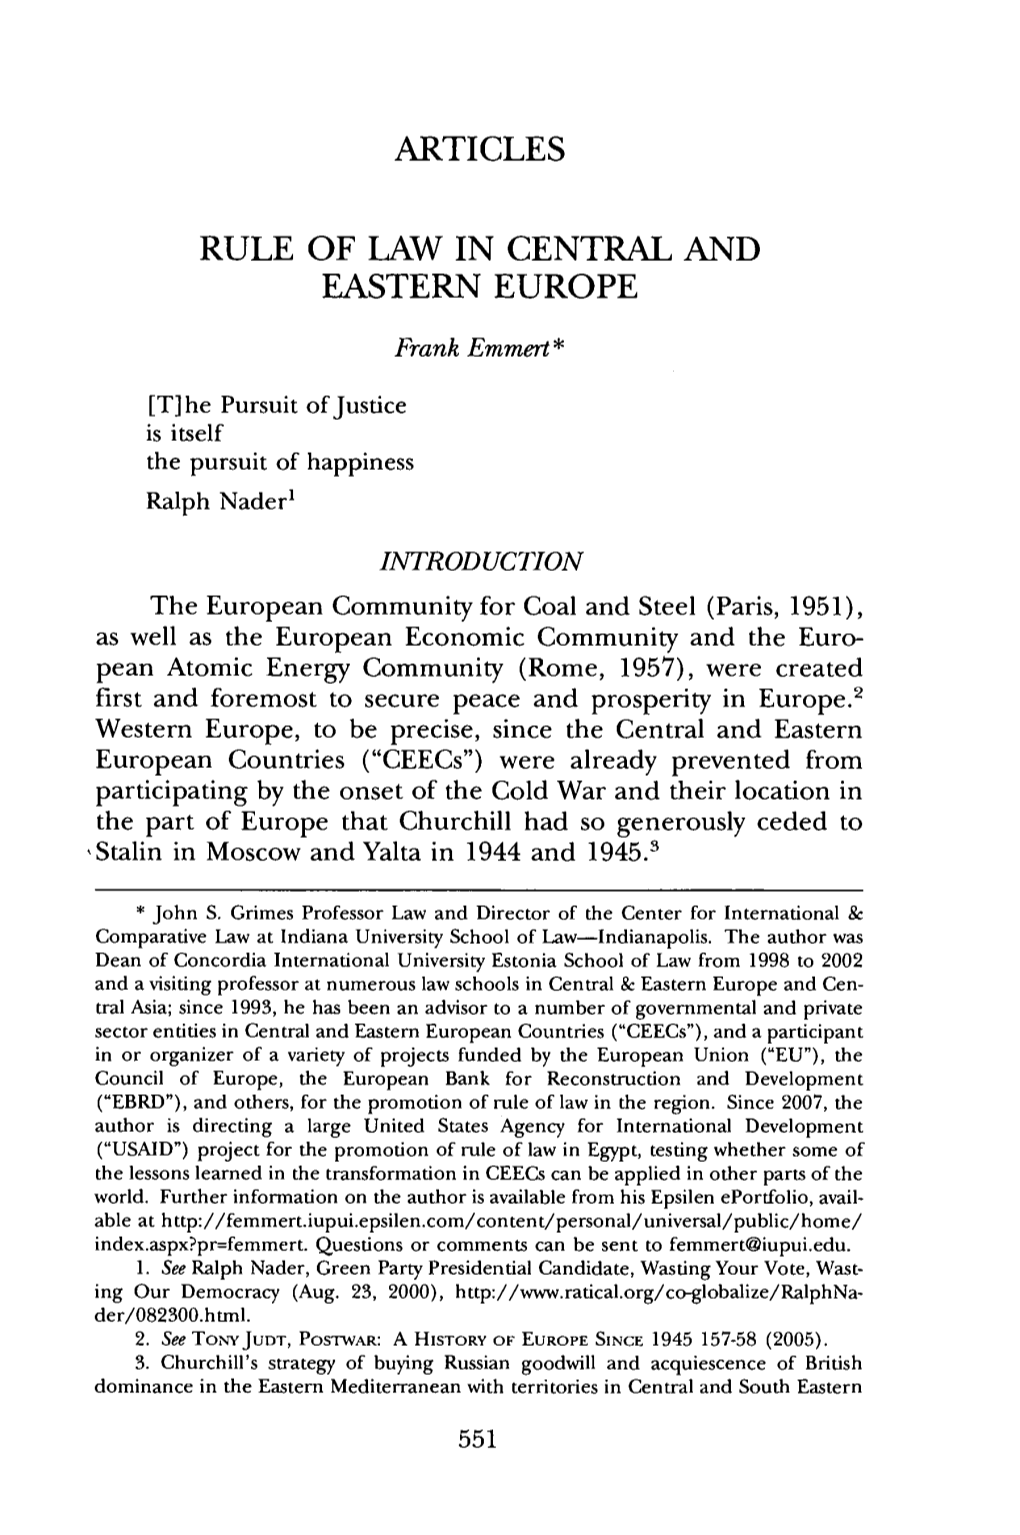 Articles Rule of Law in Central and Eastern Europe